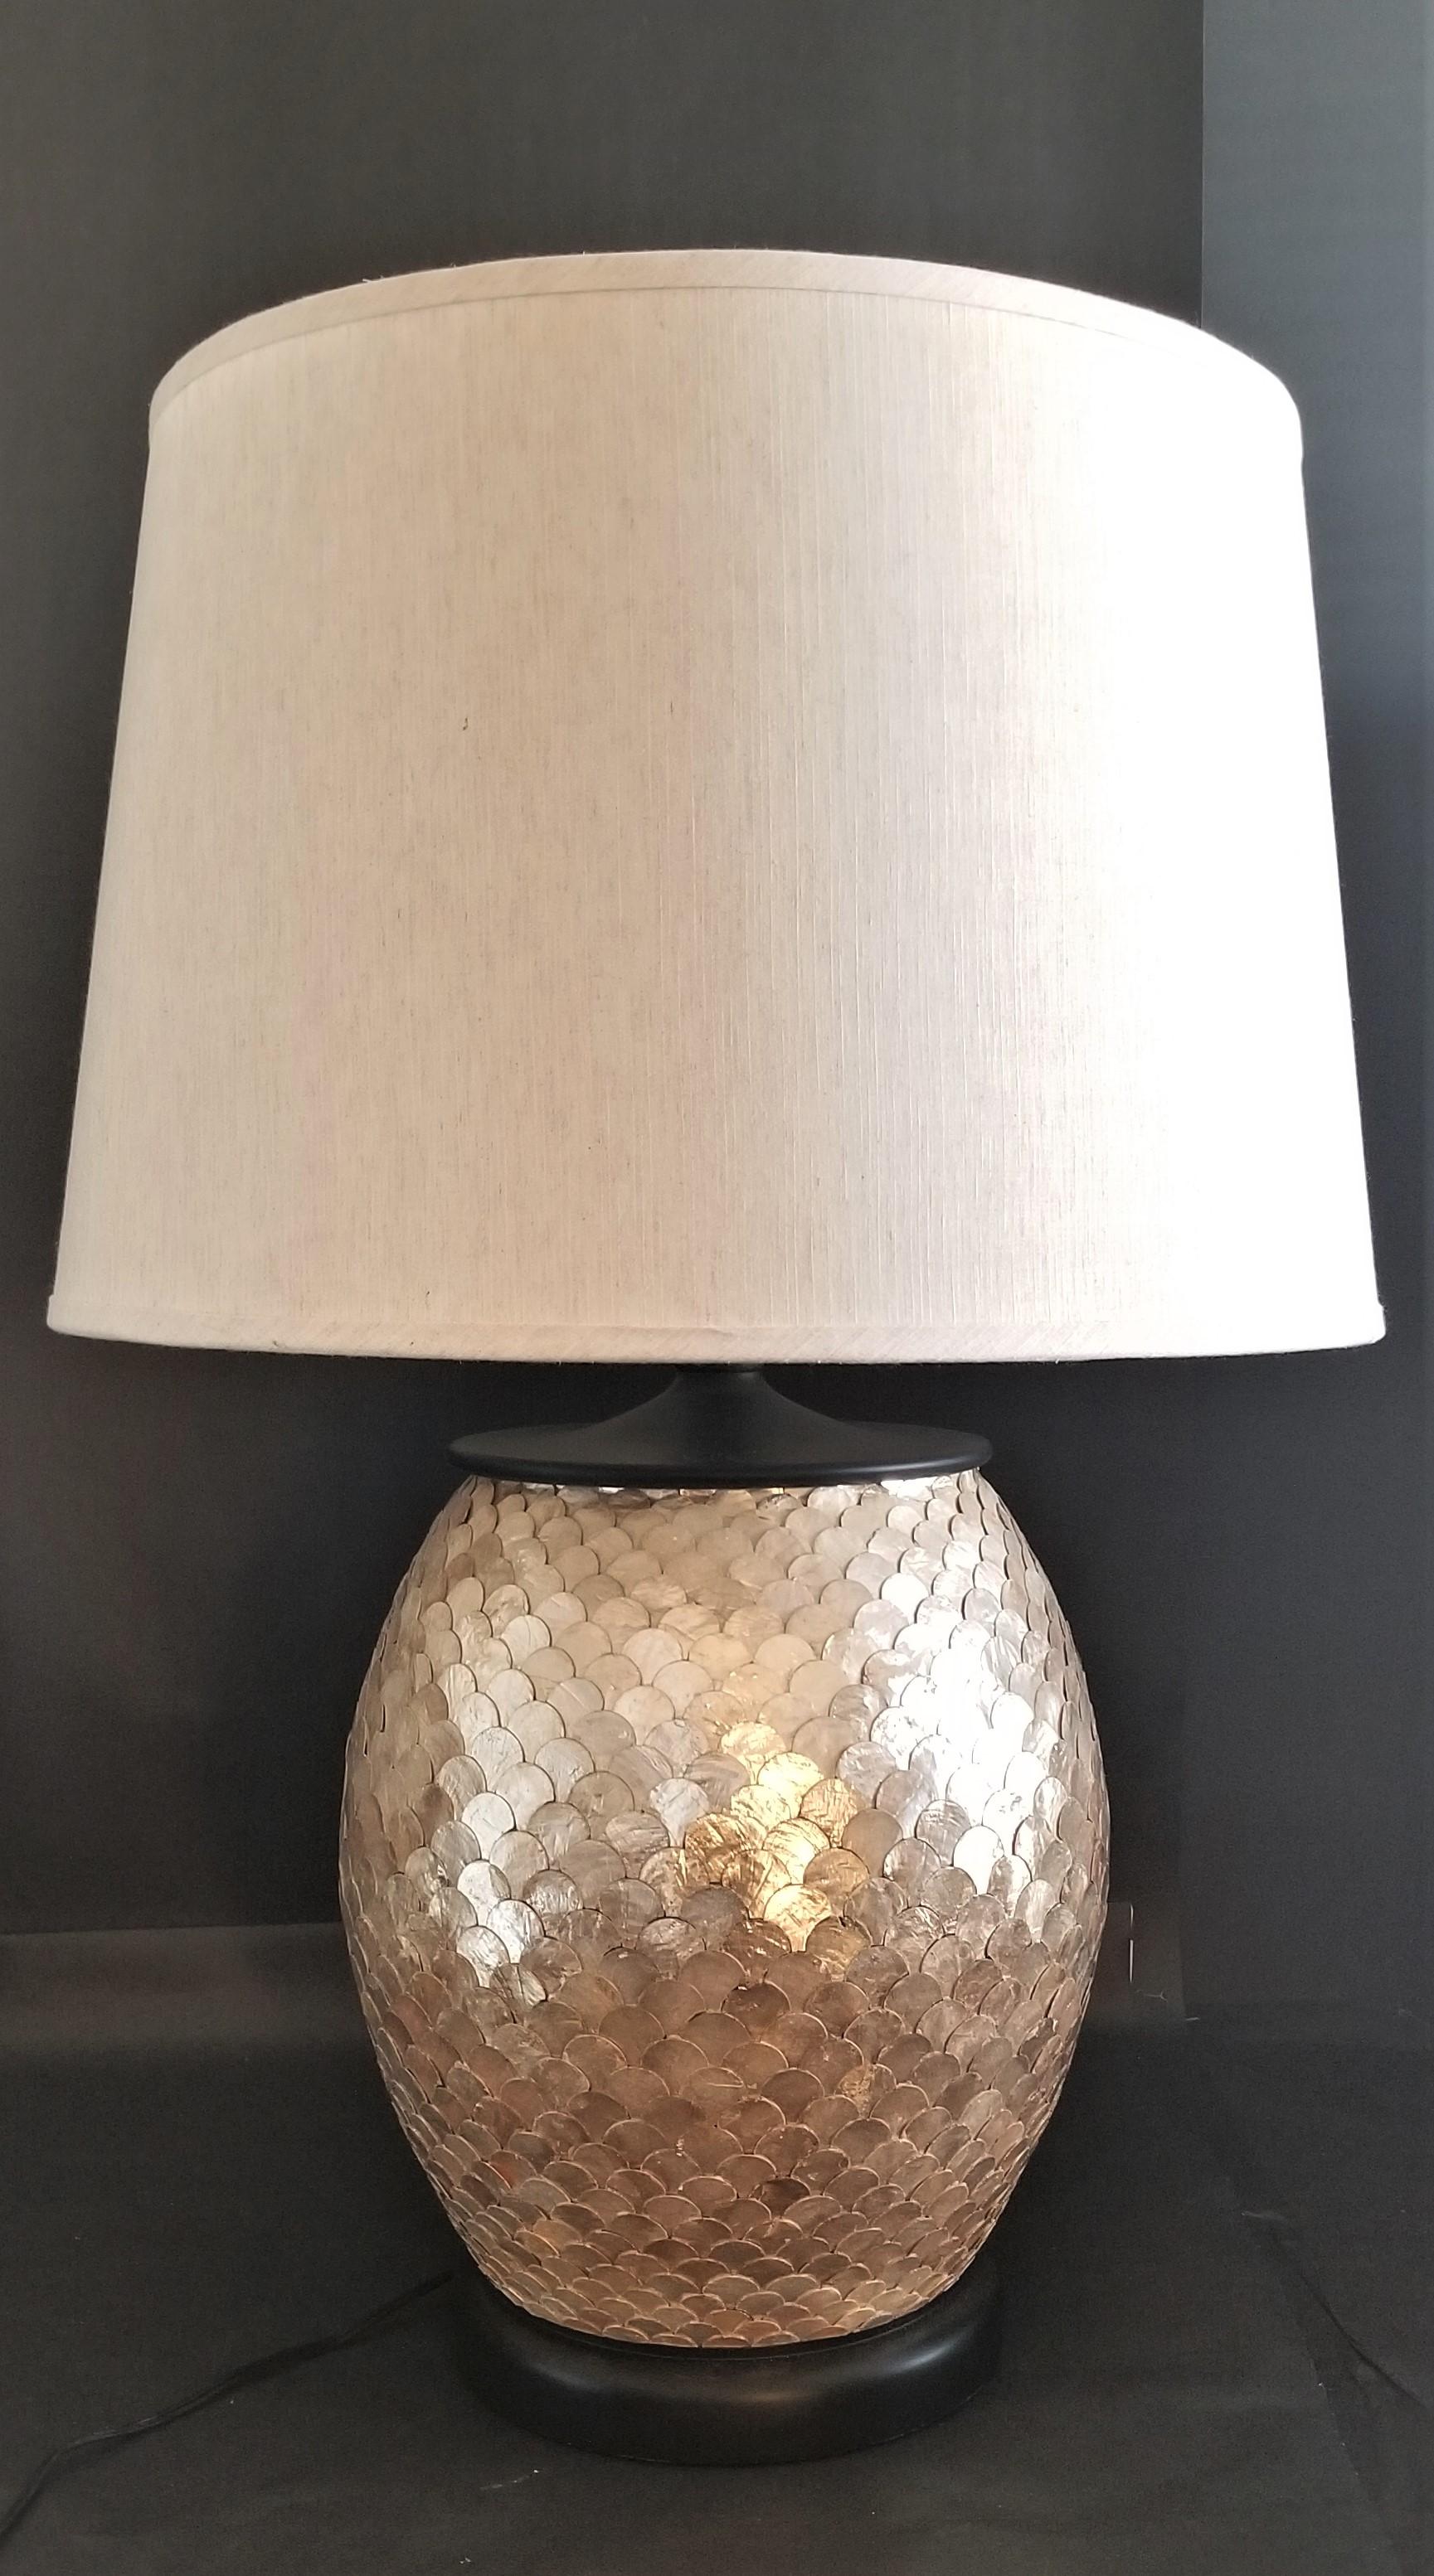 traditional table lamps